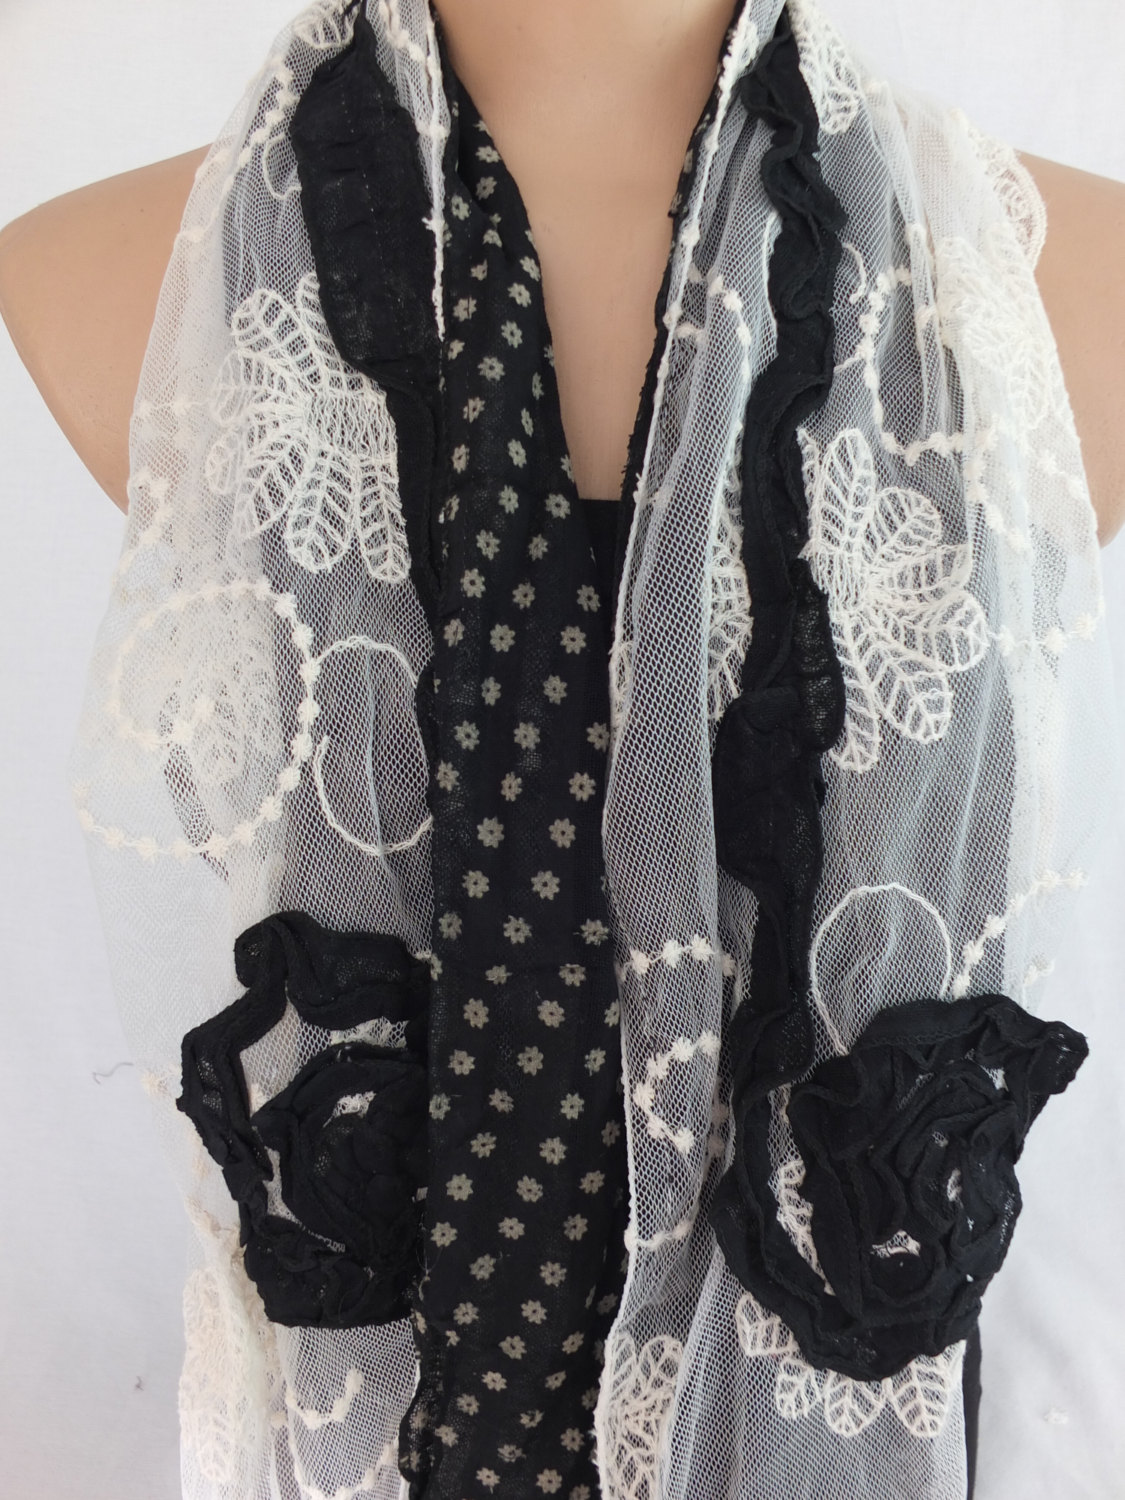 Woman Fashion Scarf , Tulle And Cotton Scarf, Black And Cream Shawl, Long Scarf Shawl, Lace Cowl, Gift For Her